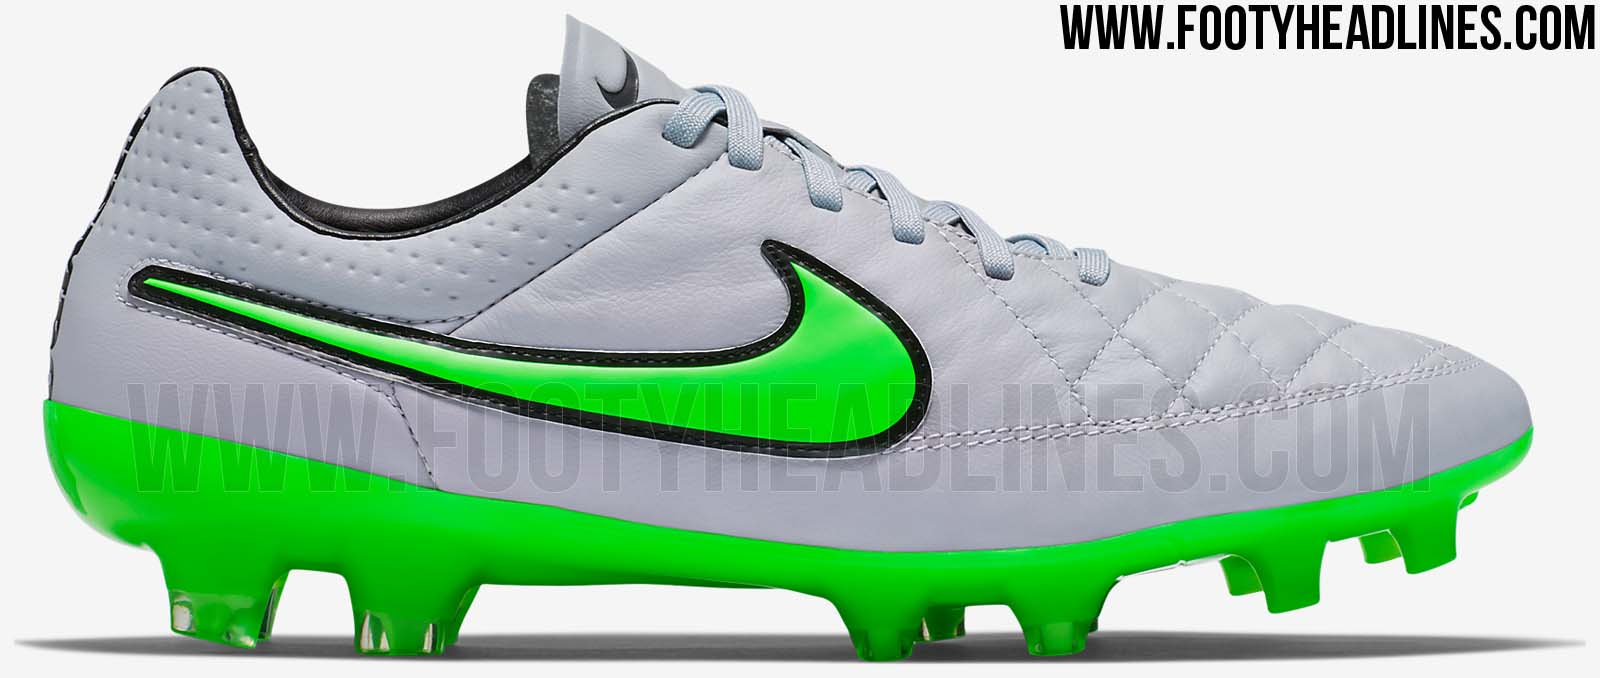 Silver / Green Legend V 2015-2016 Boots Released Footy Headlines